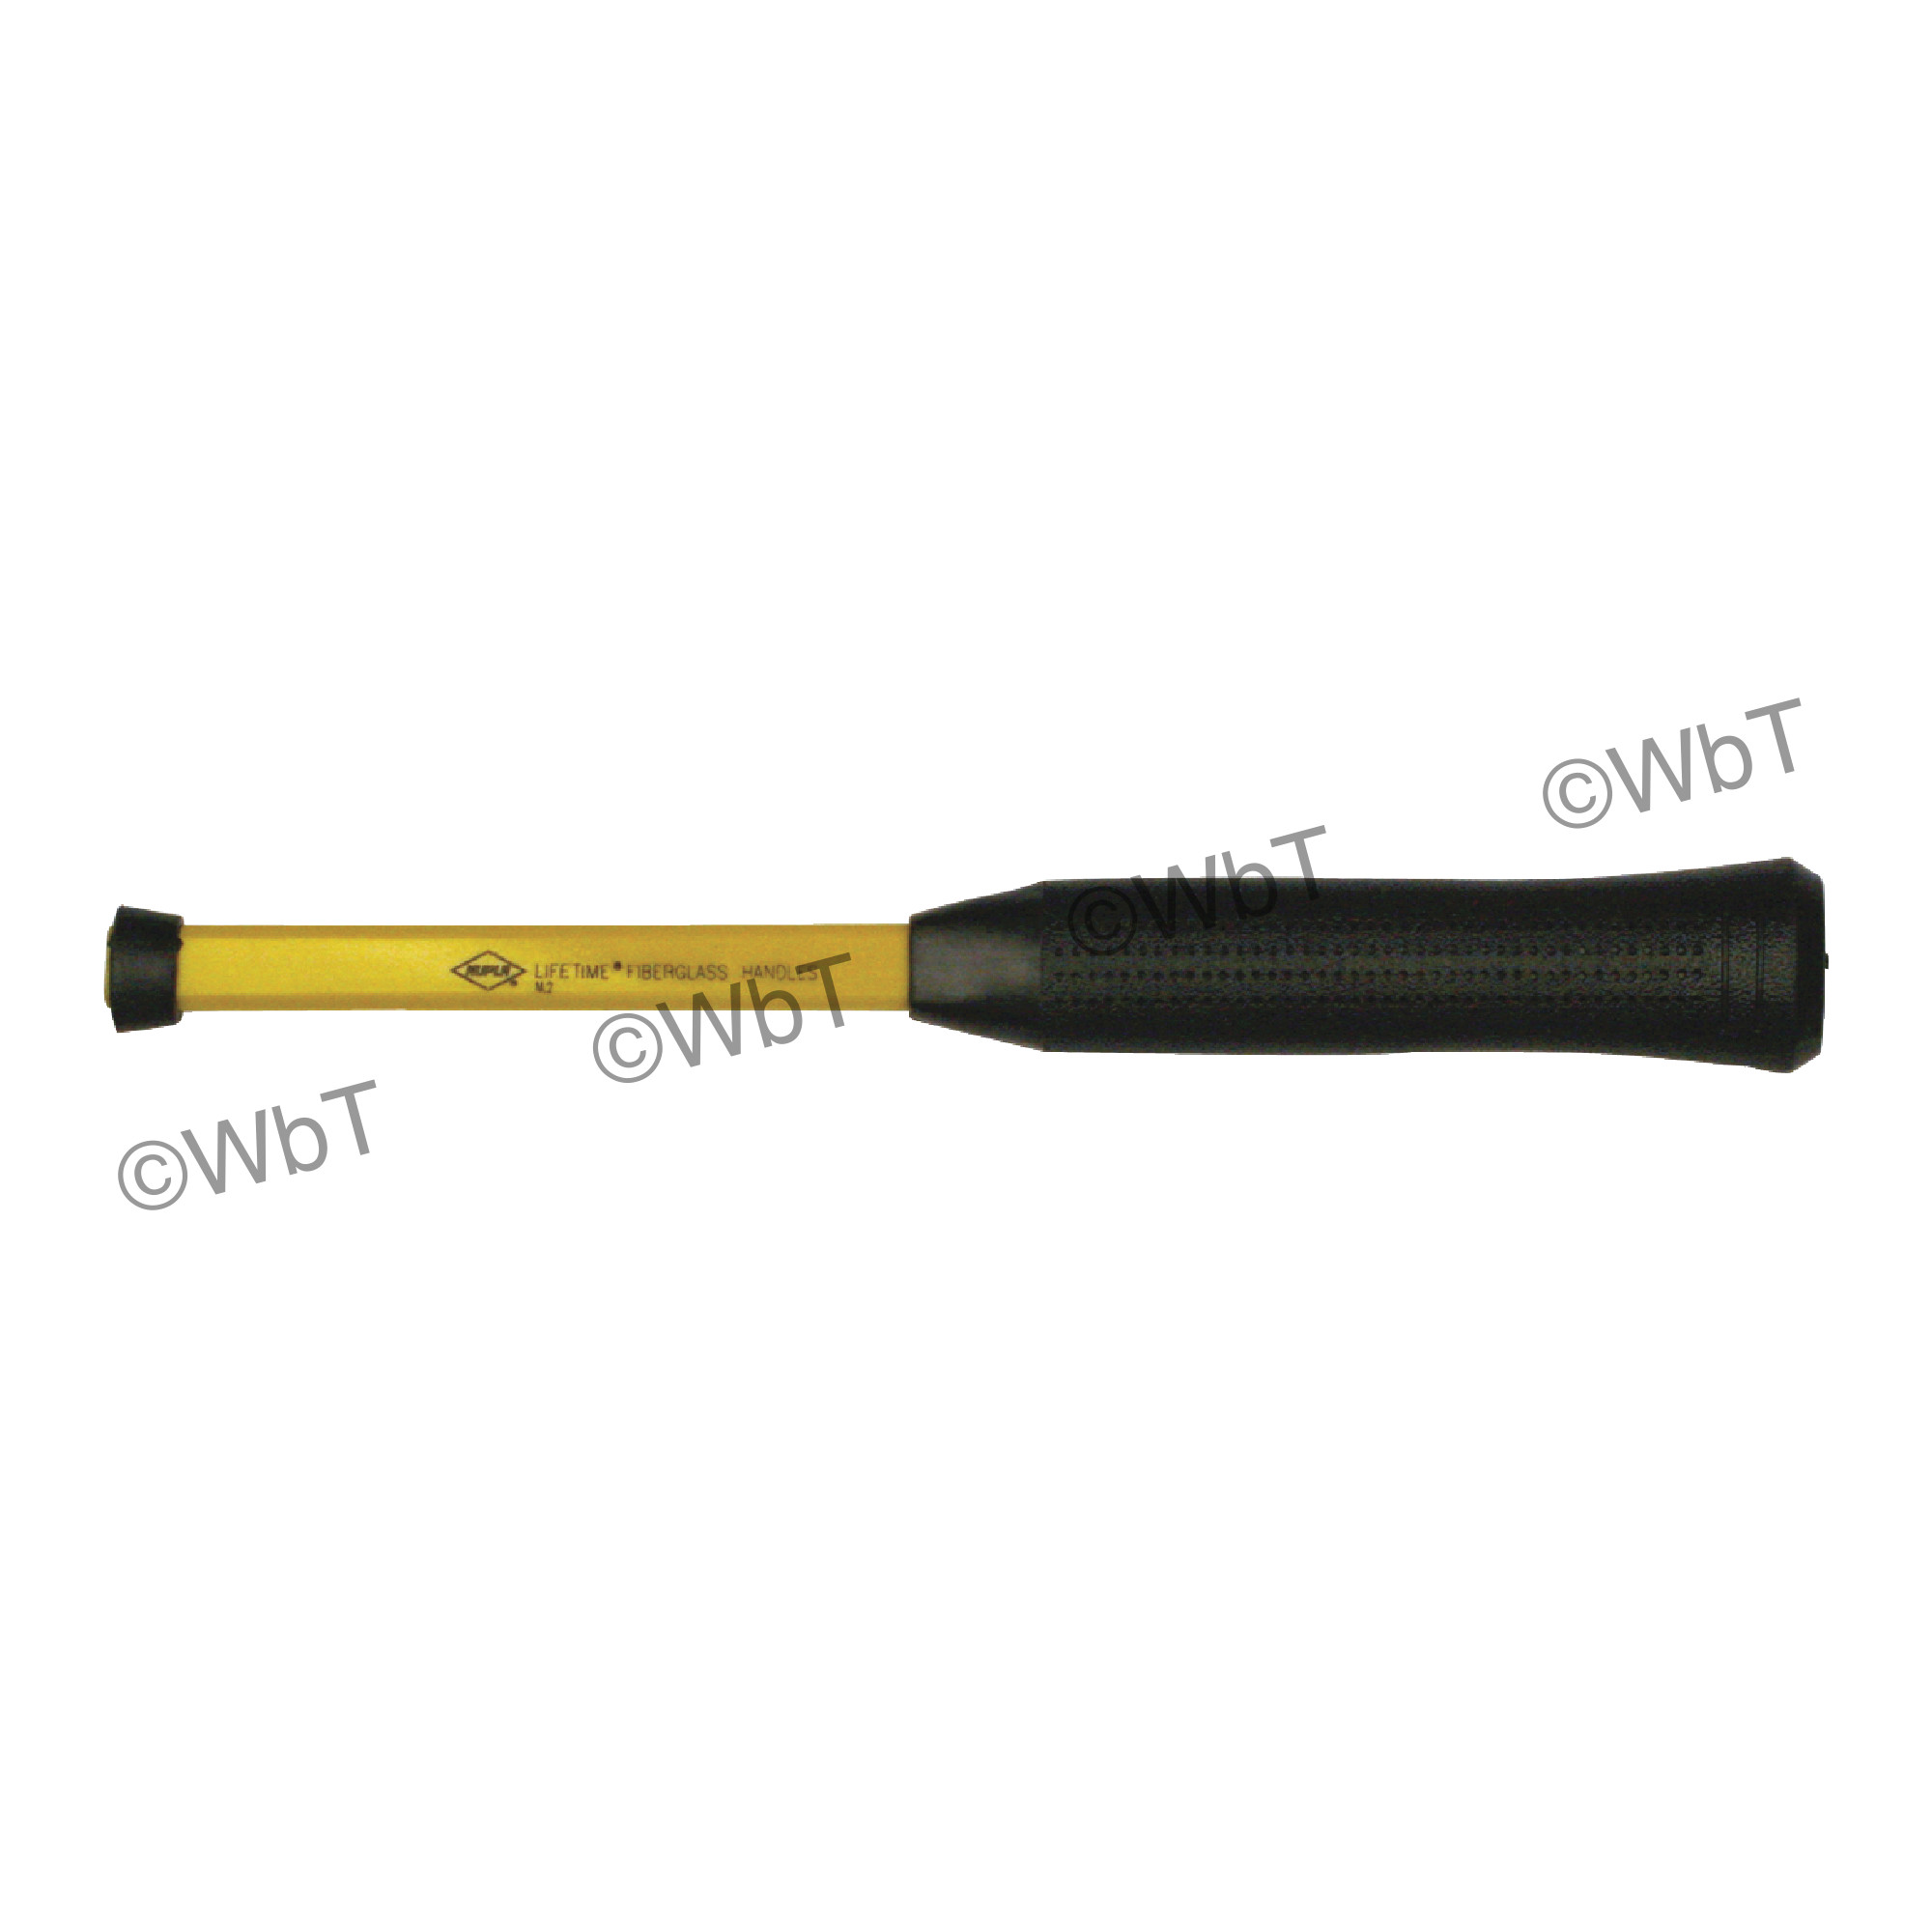 Replacement Handle for Machinist's Ball Pein Hammers